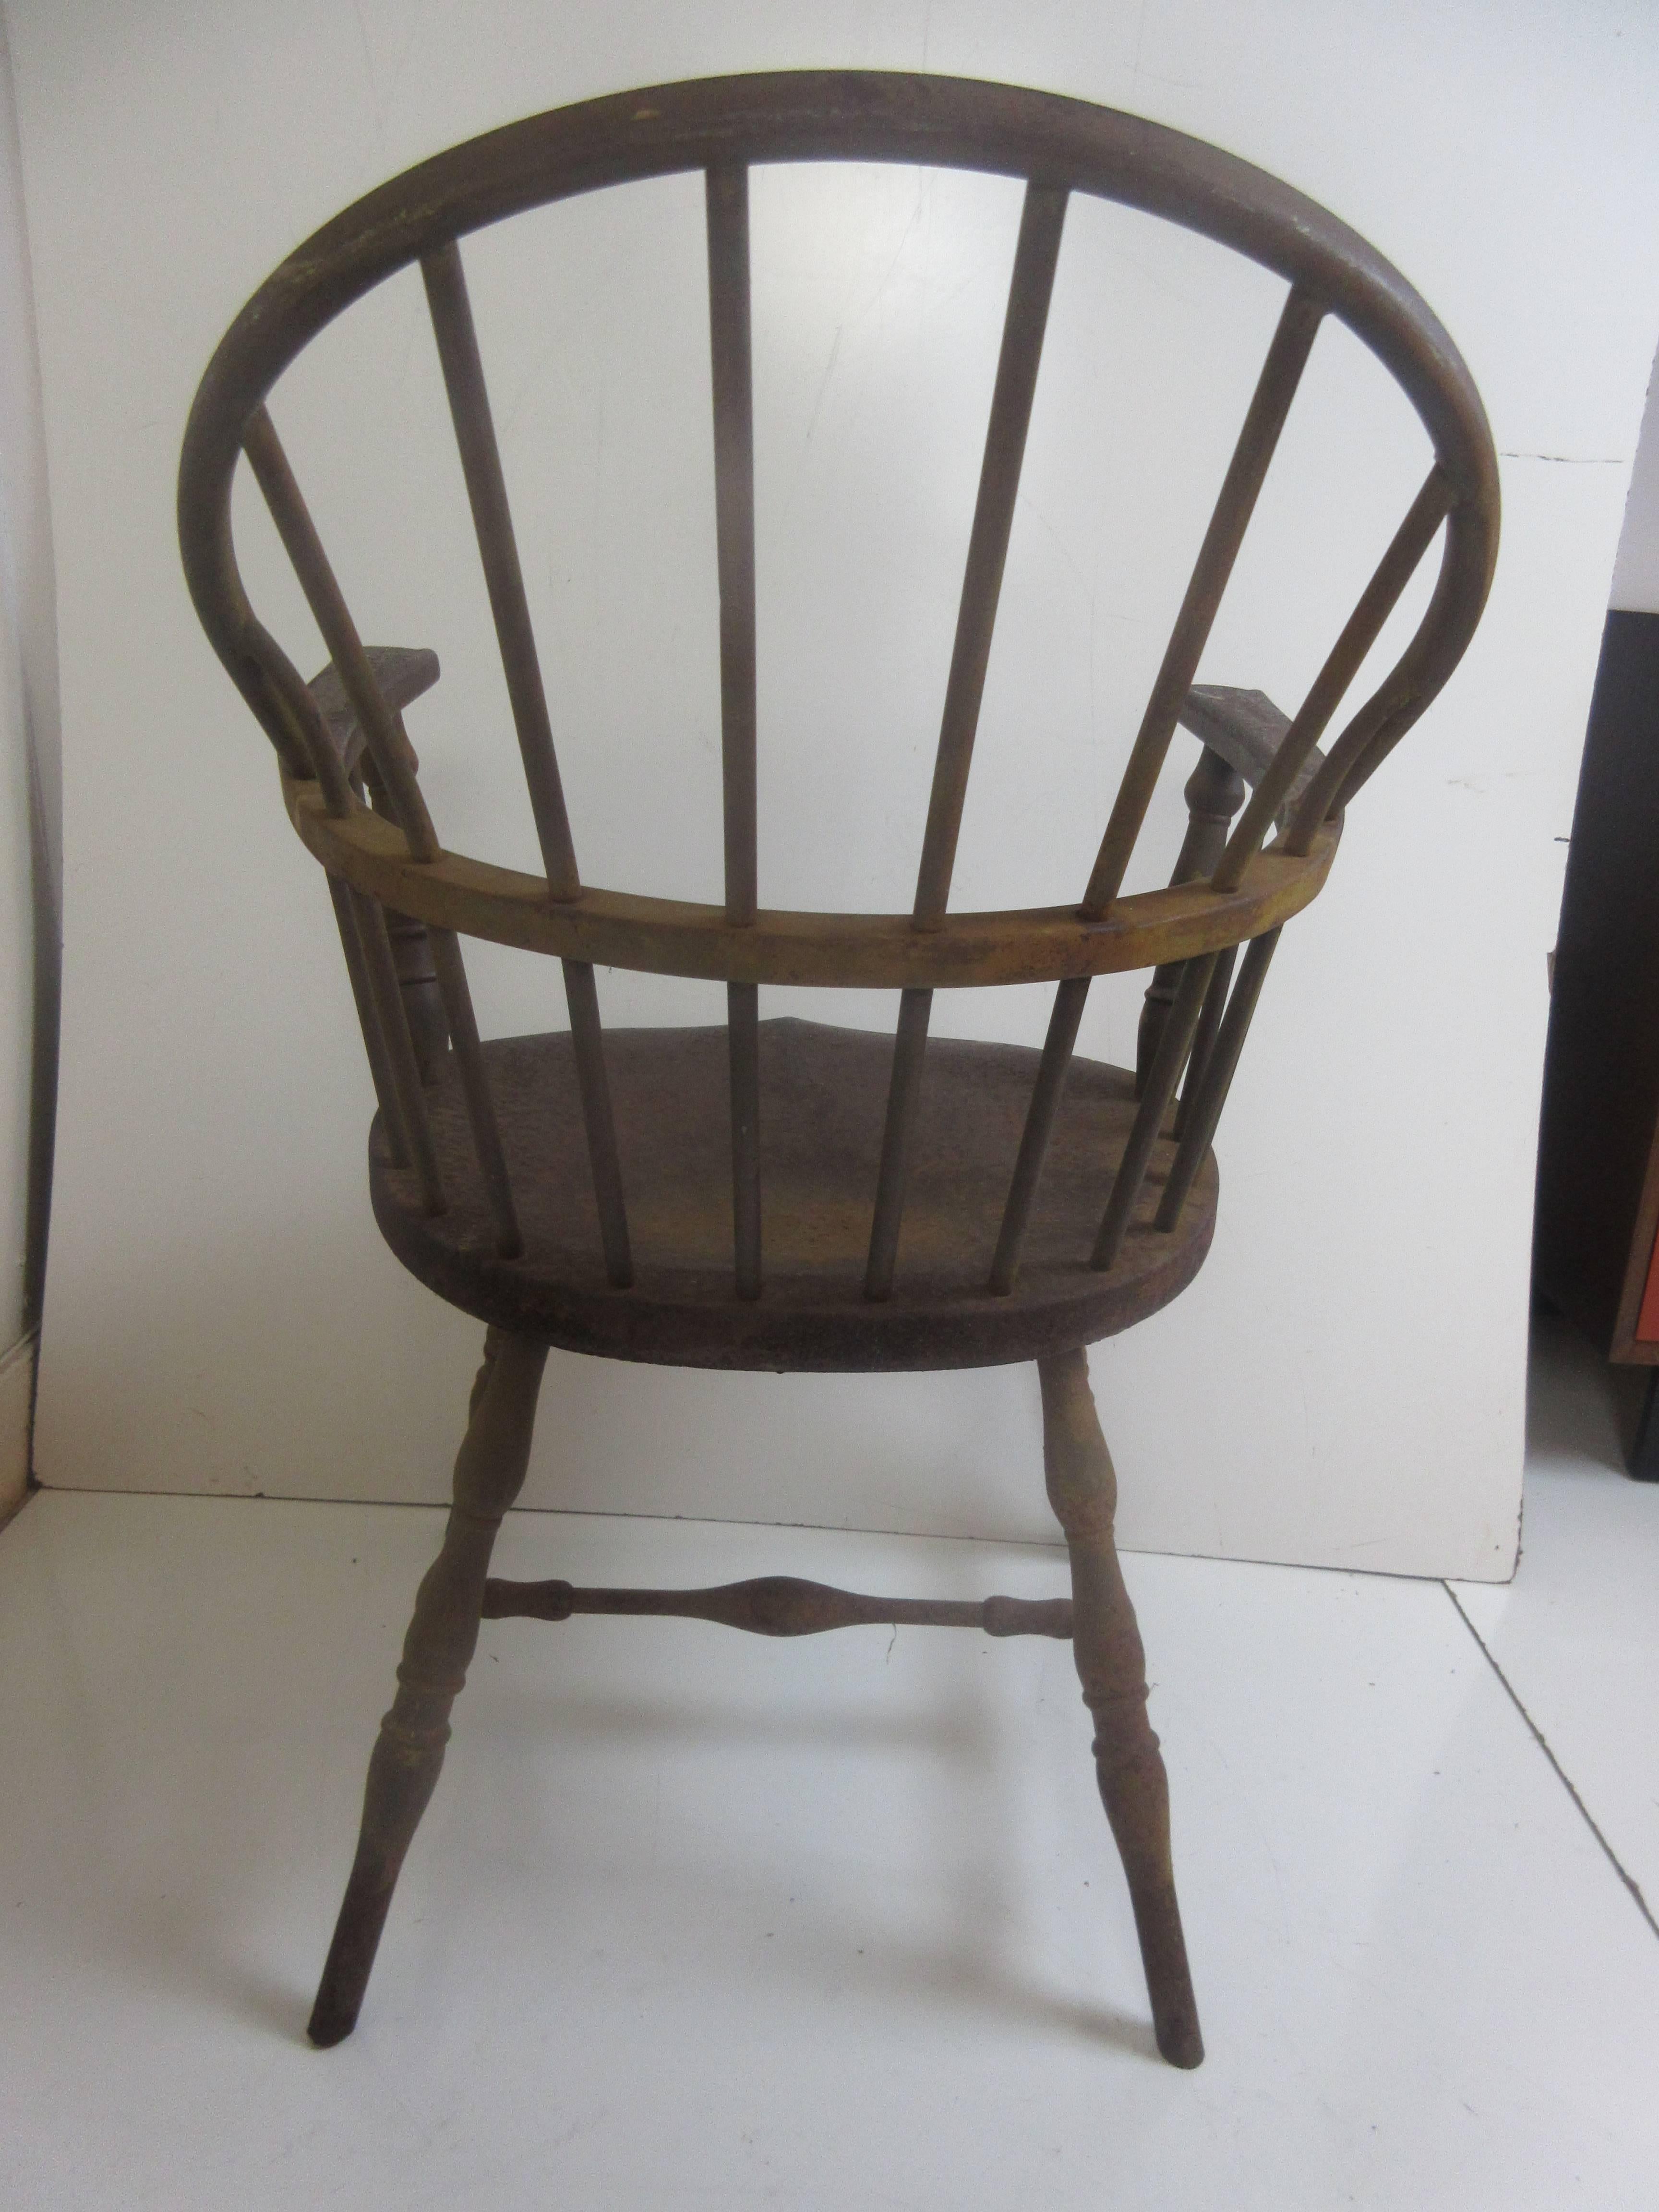 Machine Age Windsor Chair from Philadelphia Library in Steel by Canton Art Metal Company